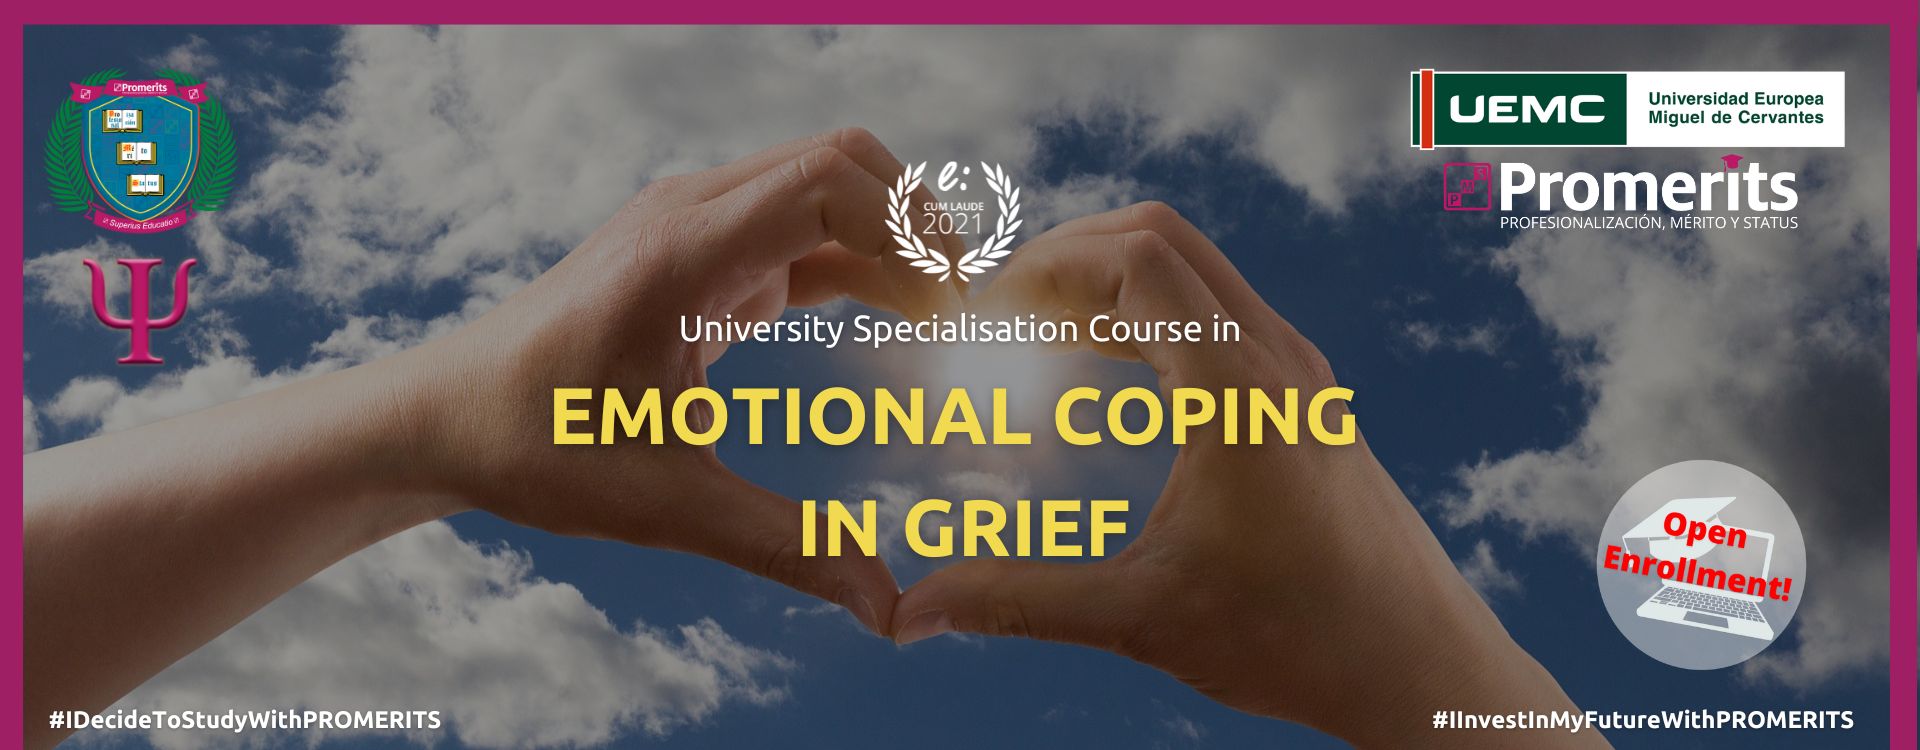 University Sepecialisation Course in Emotional Coping in Grief